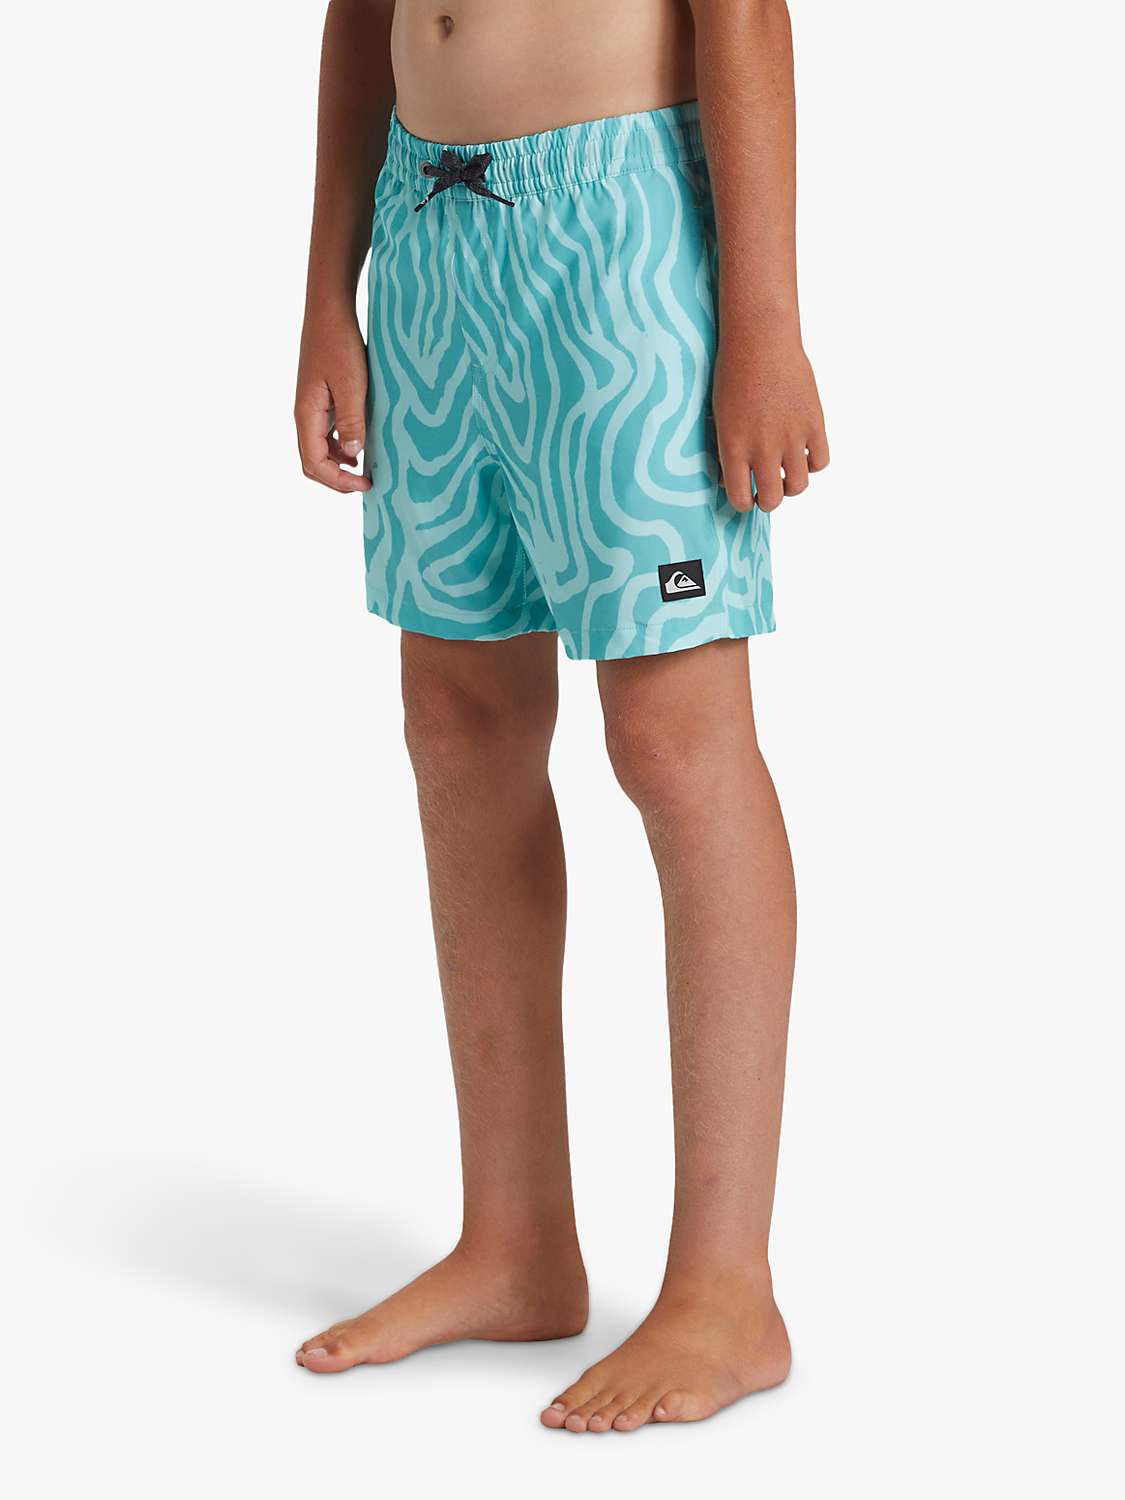 Buy Quicksilver Kids' Everyday Collection SURFSILK Abstract Print Swim Shorts, Swedish Blue Online at johnlewis.com